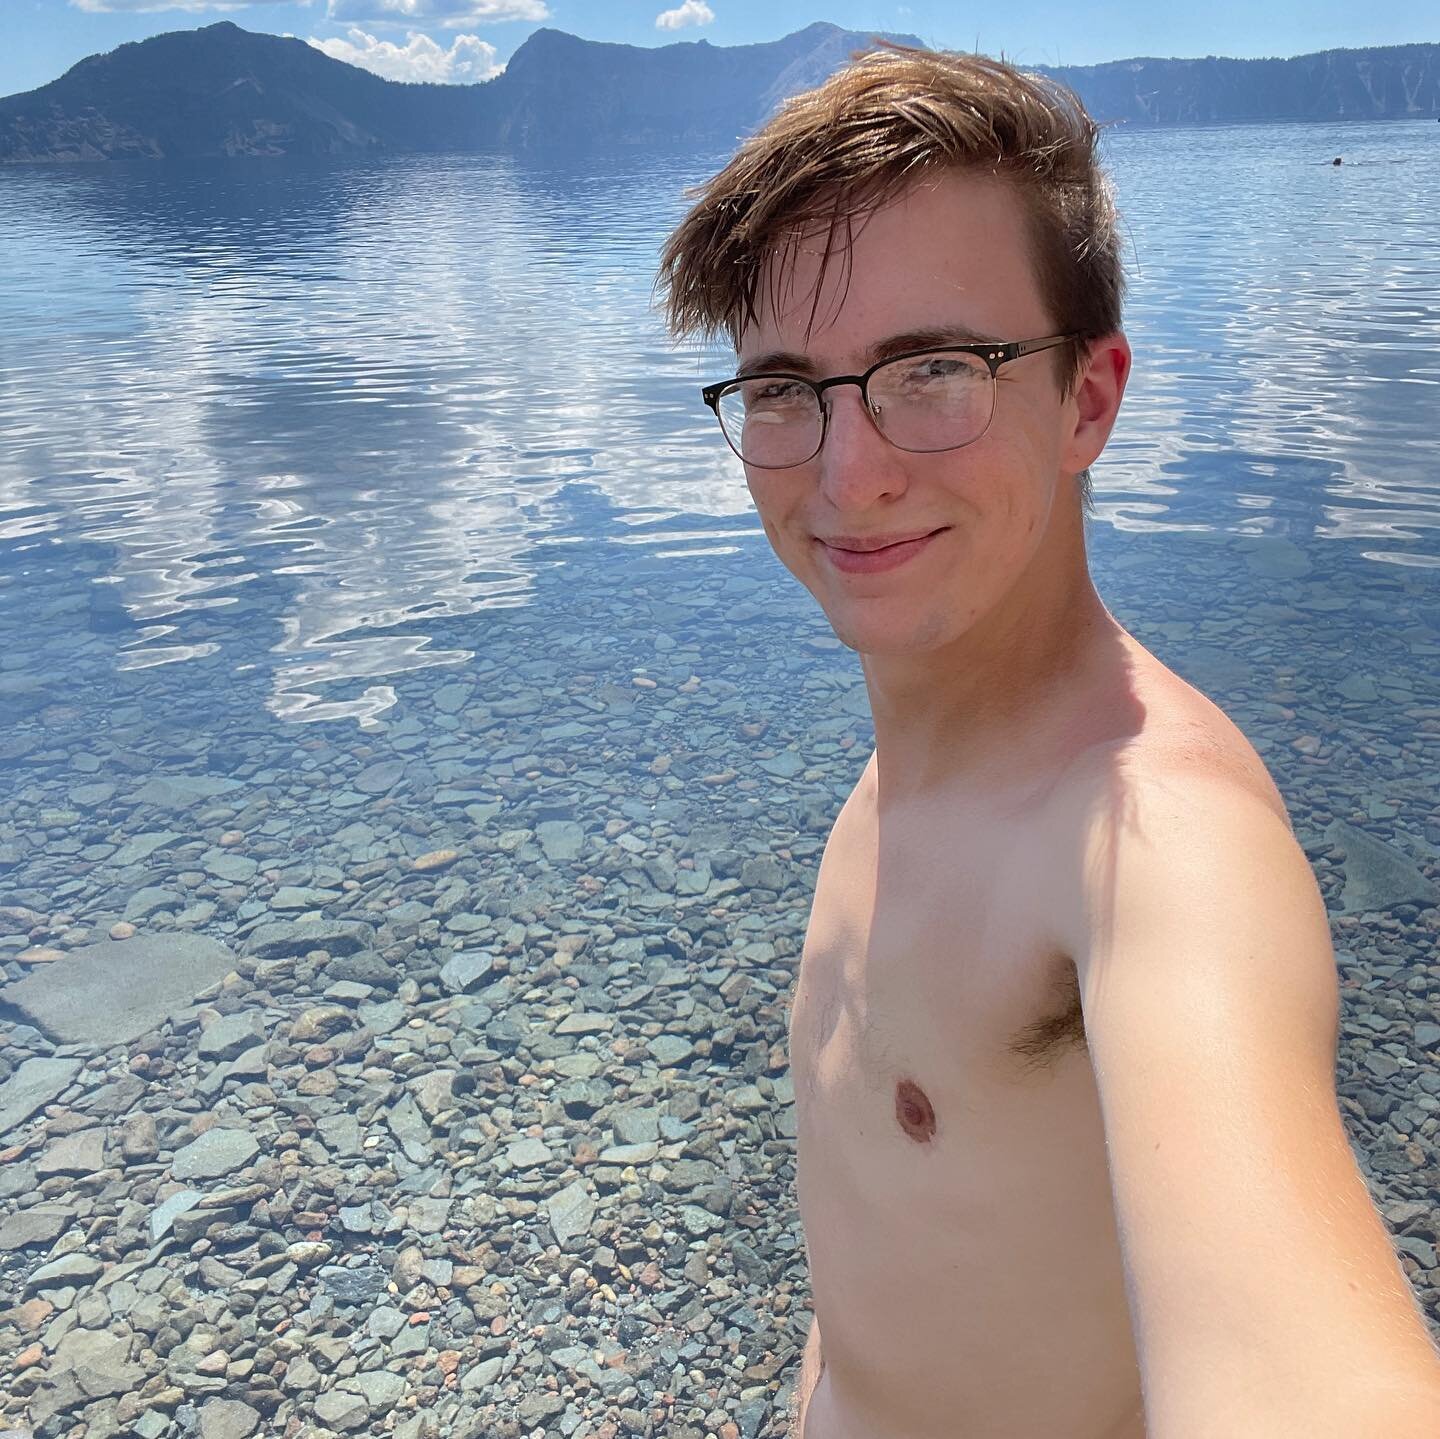 I didn&rsquo;t plan on hitting this park and once I got there I didn&rsquo;t plan on hiking down to swim but it was so worth it! The water was cold but so blue and so clear. Worth every sweaty minute hiking back up from the caldera 😂

#Queer #LGBTQ 